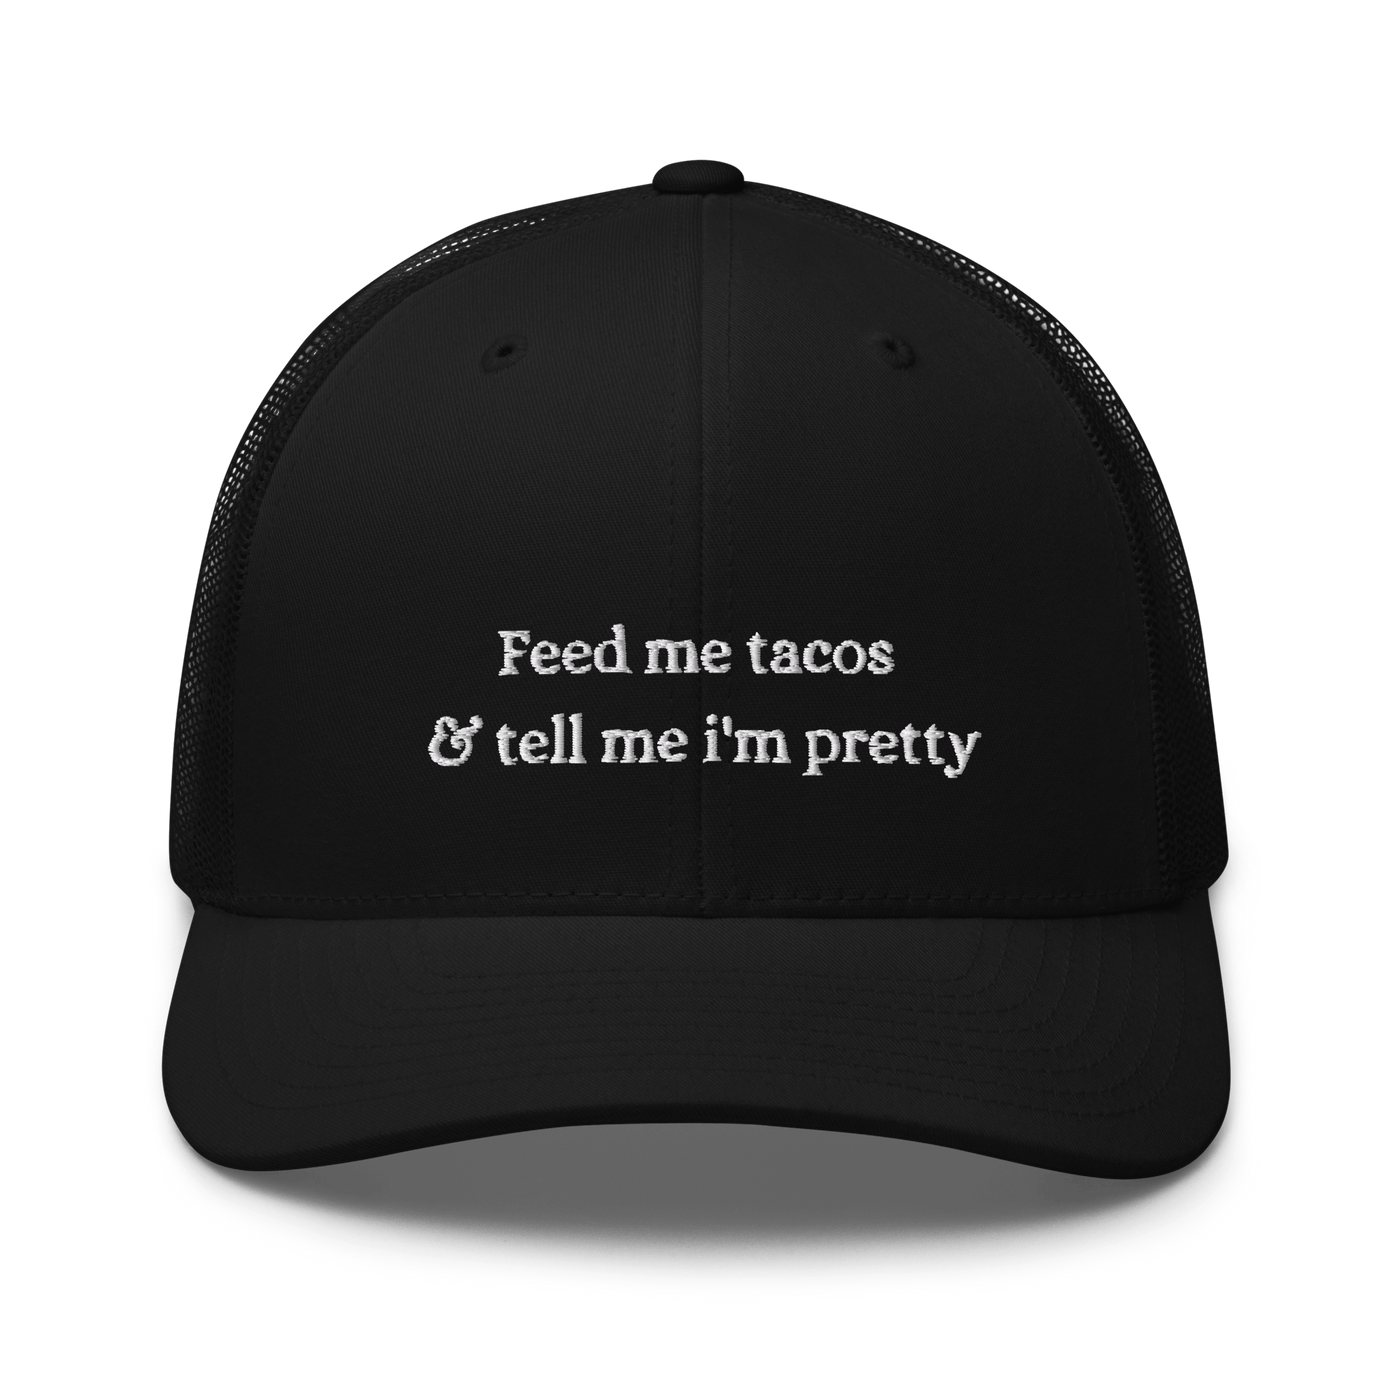 Feed me tacos Trucker Cap - Black - - Just Another Cap Store